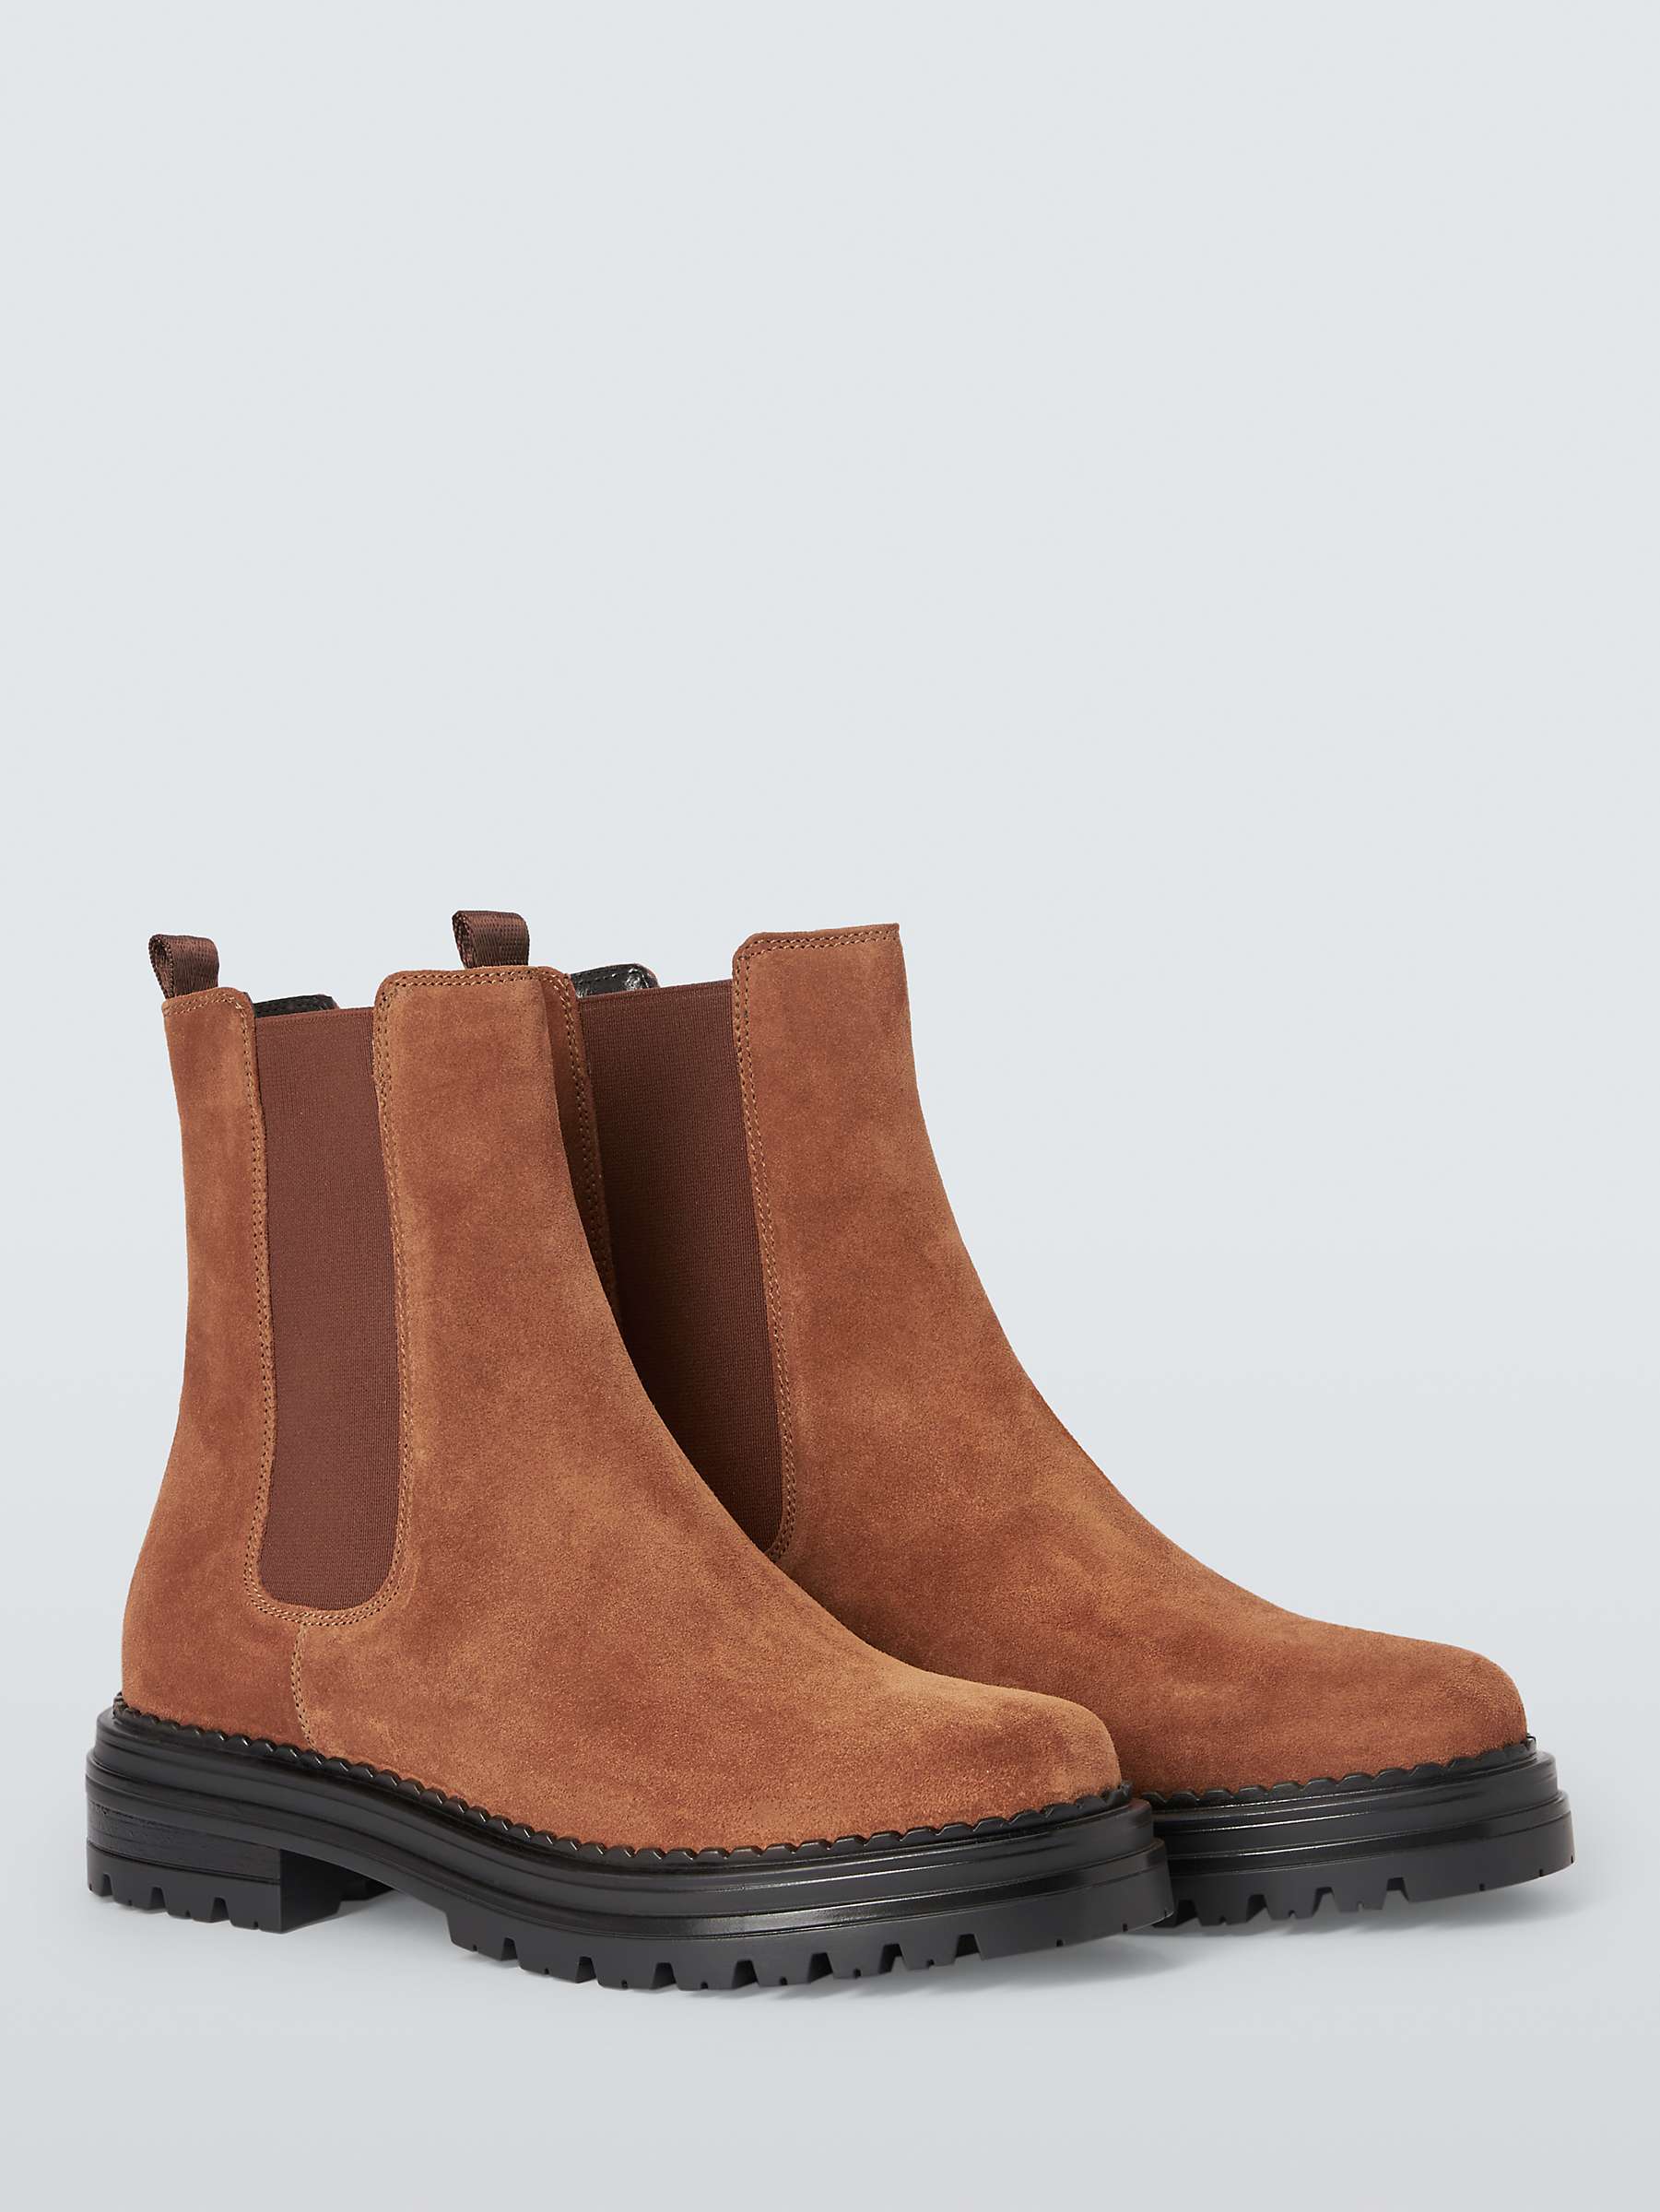 Buy John Lewis Poppie Suede Cleated Sole High Cut Chelsea Boots, Tan Online at johnlewis.com